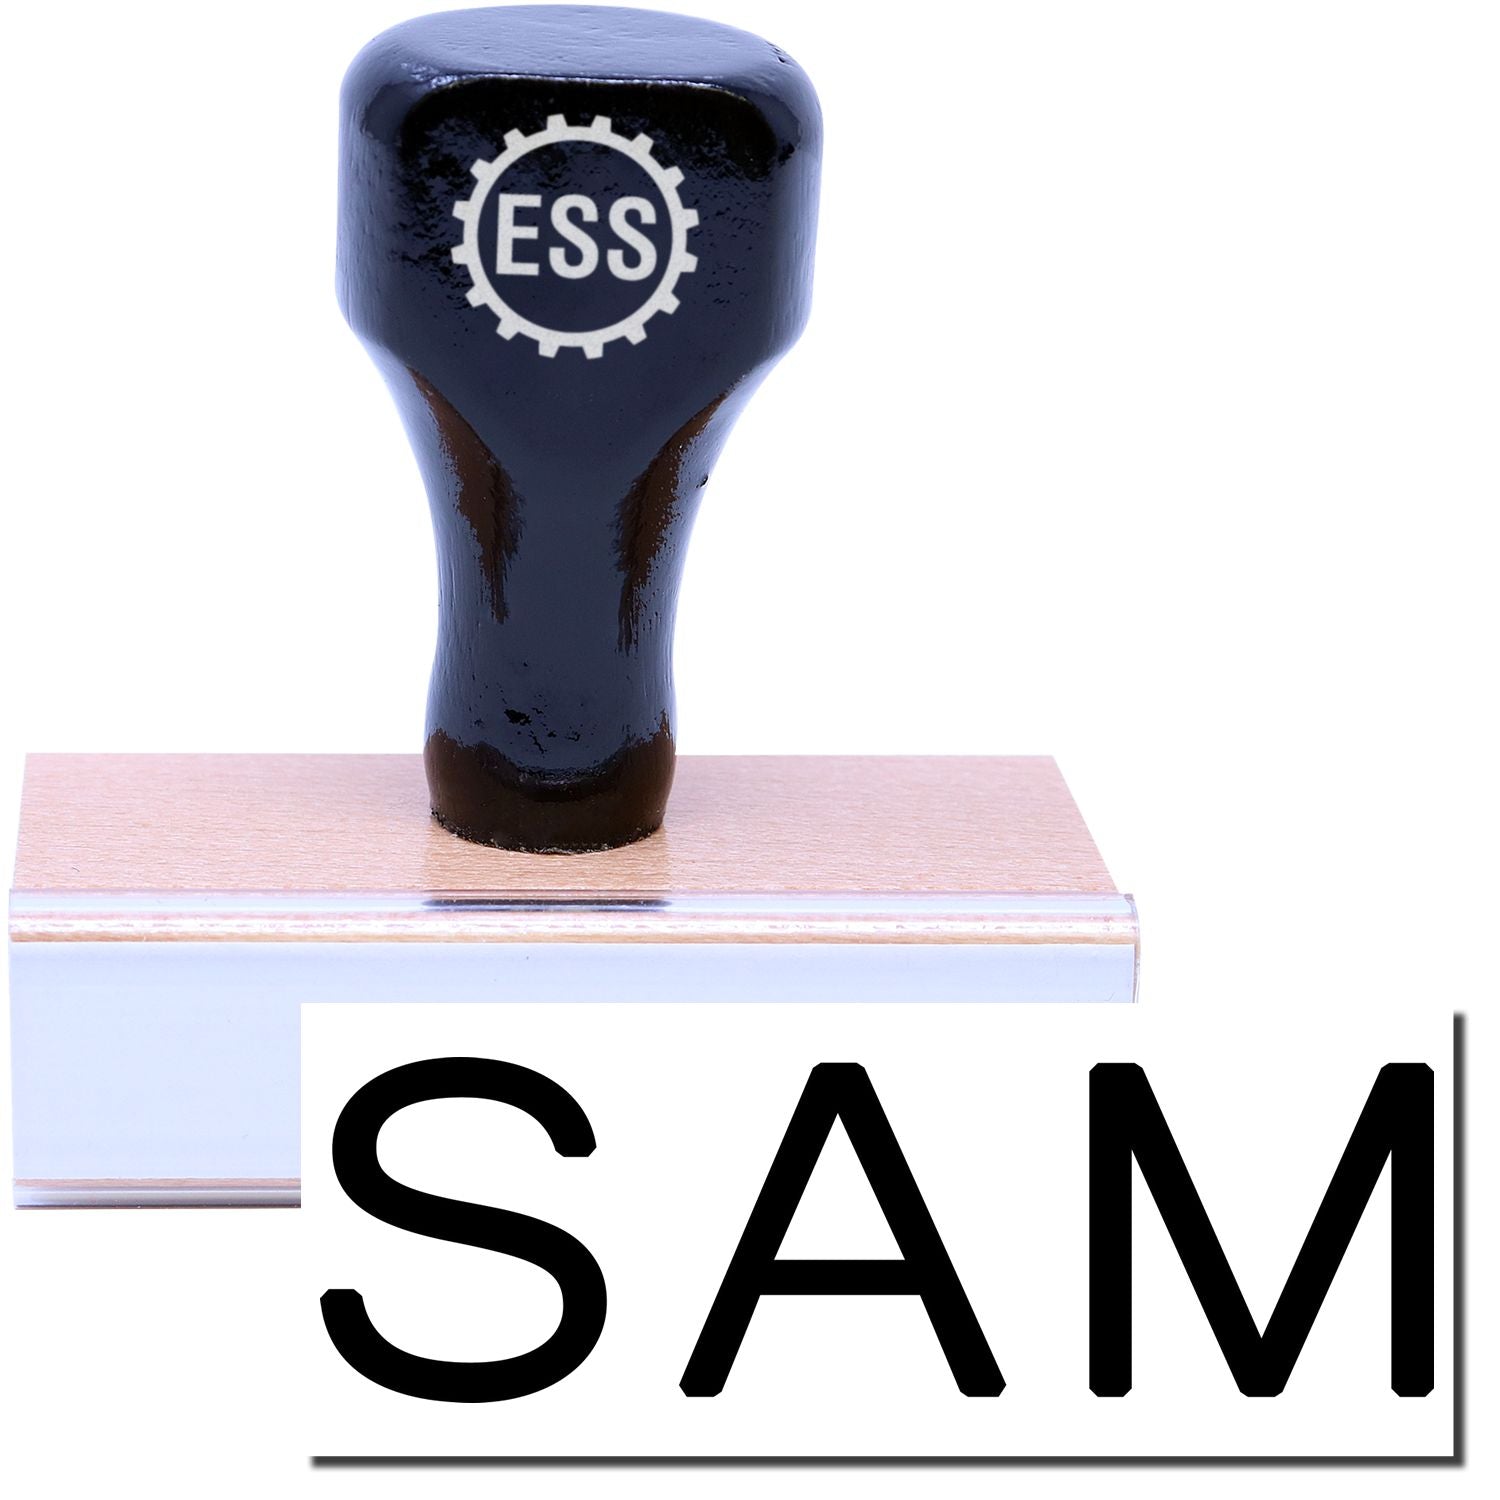 A stock office rubber stamp with a stamped image showing how the text "SAM" in a large font is displayed after stamping.